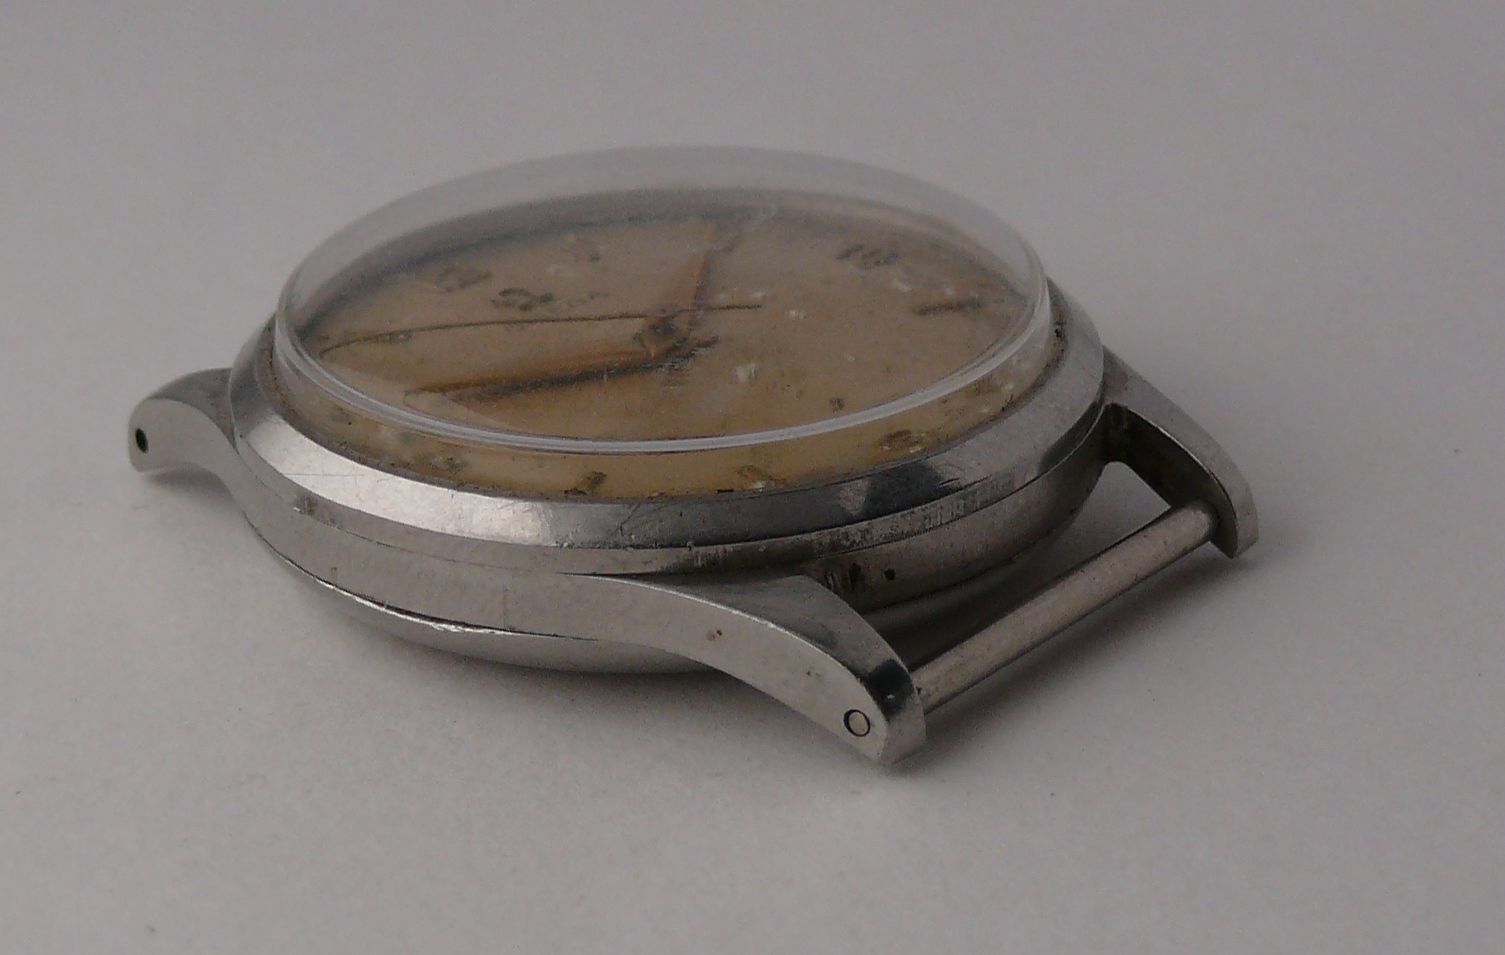 Vintage Gents Omega Manual Wind 30T2 Wristwatch. Please note this watch does not currently work - Image 3 of 8